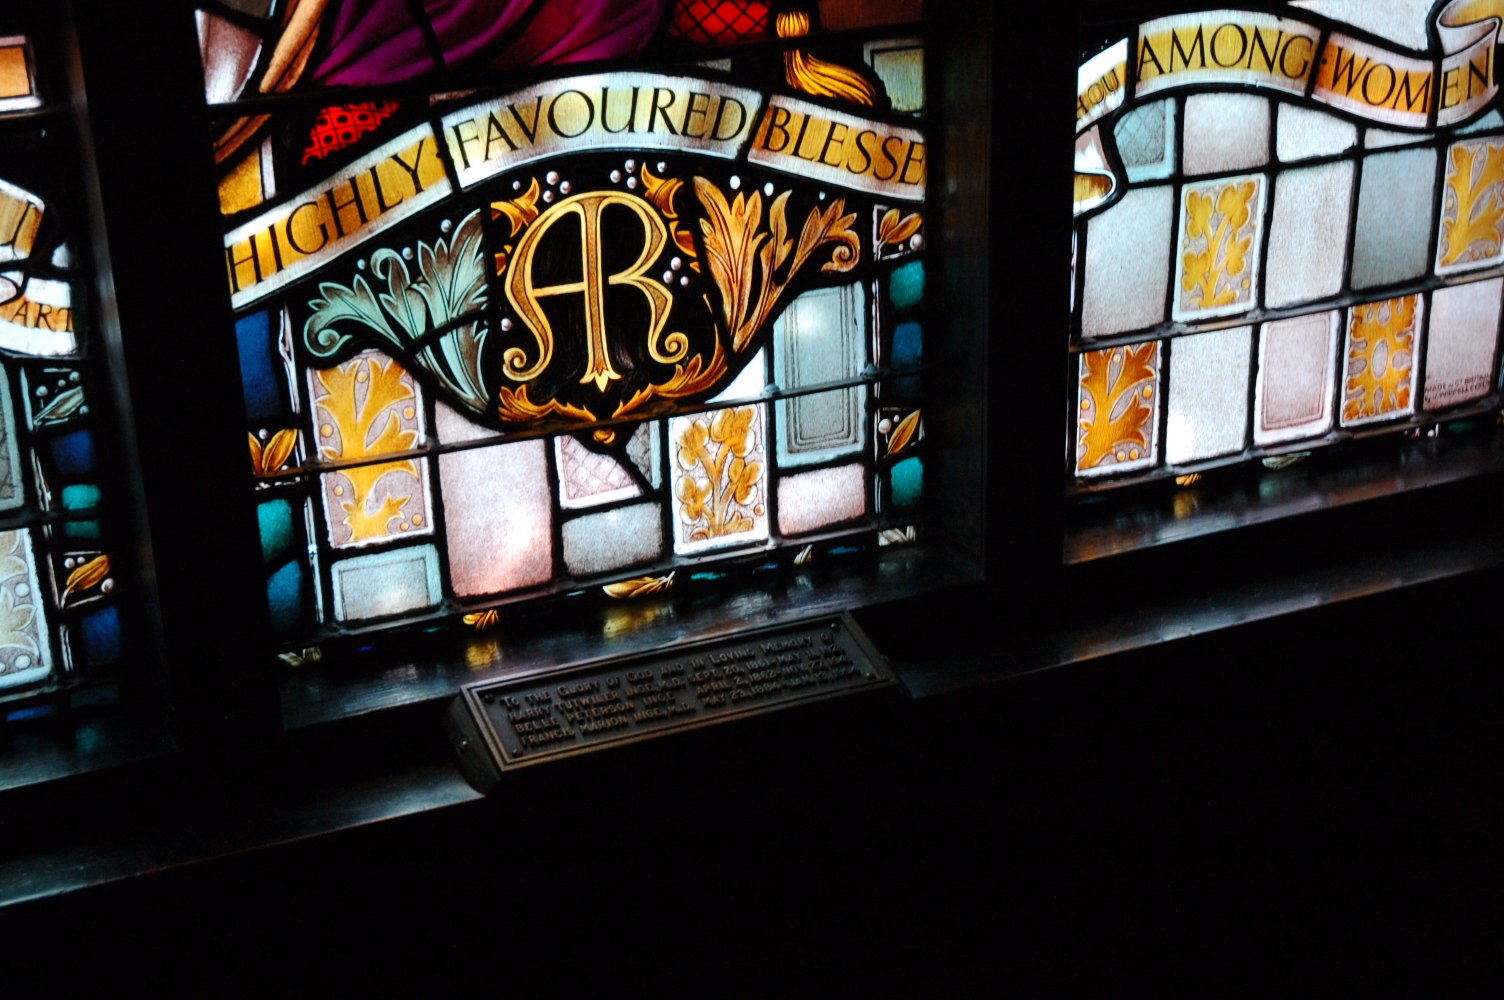 stained glass window detail: words on banner "highly favoured blessed... you among women"